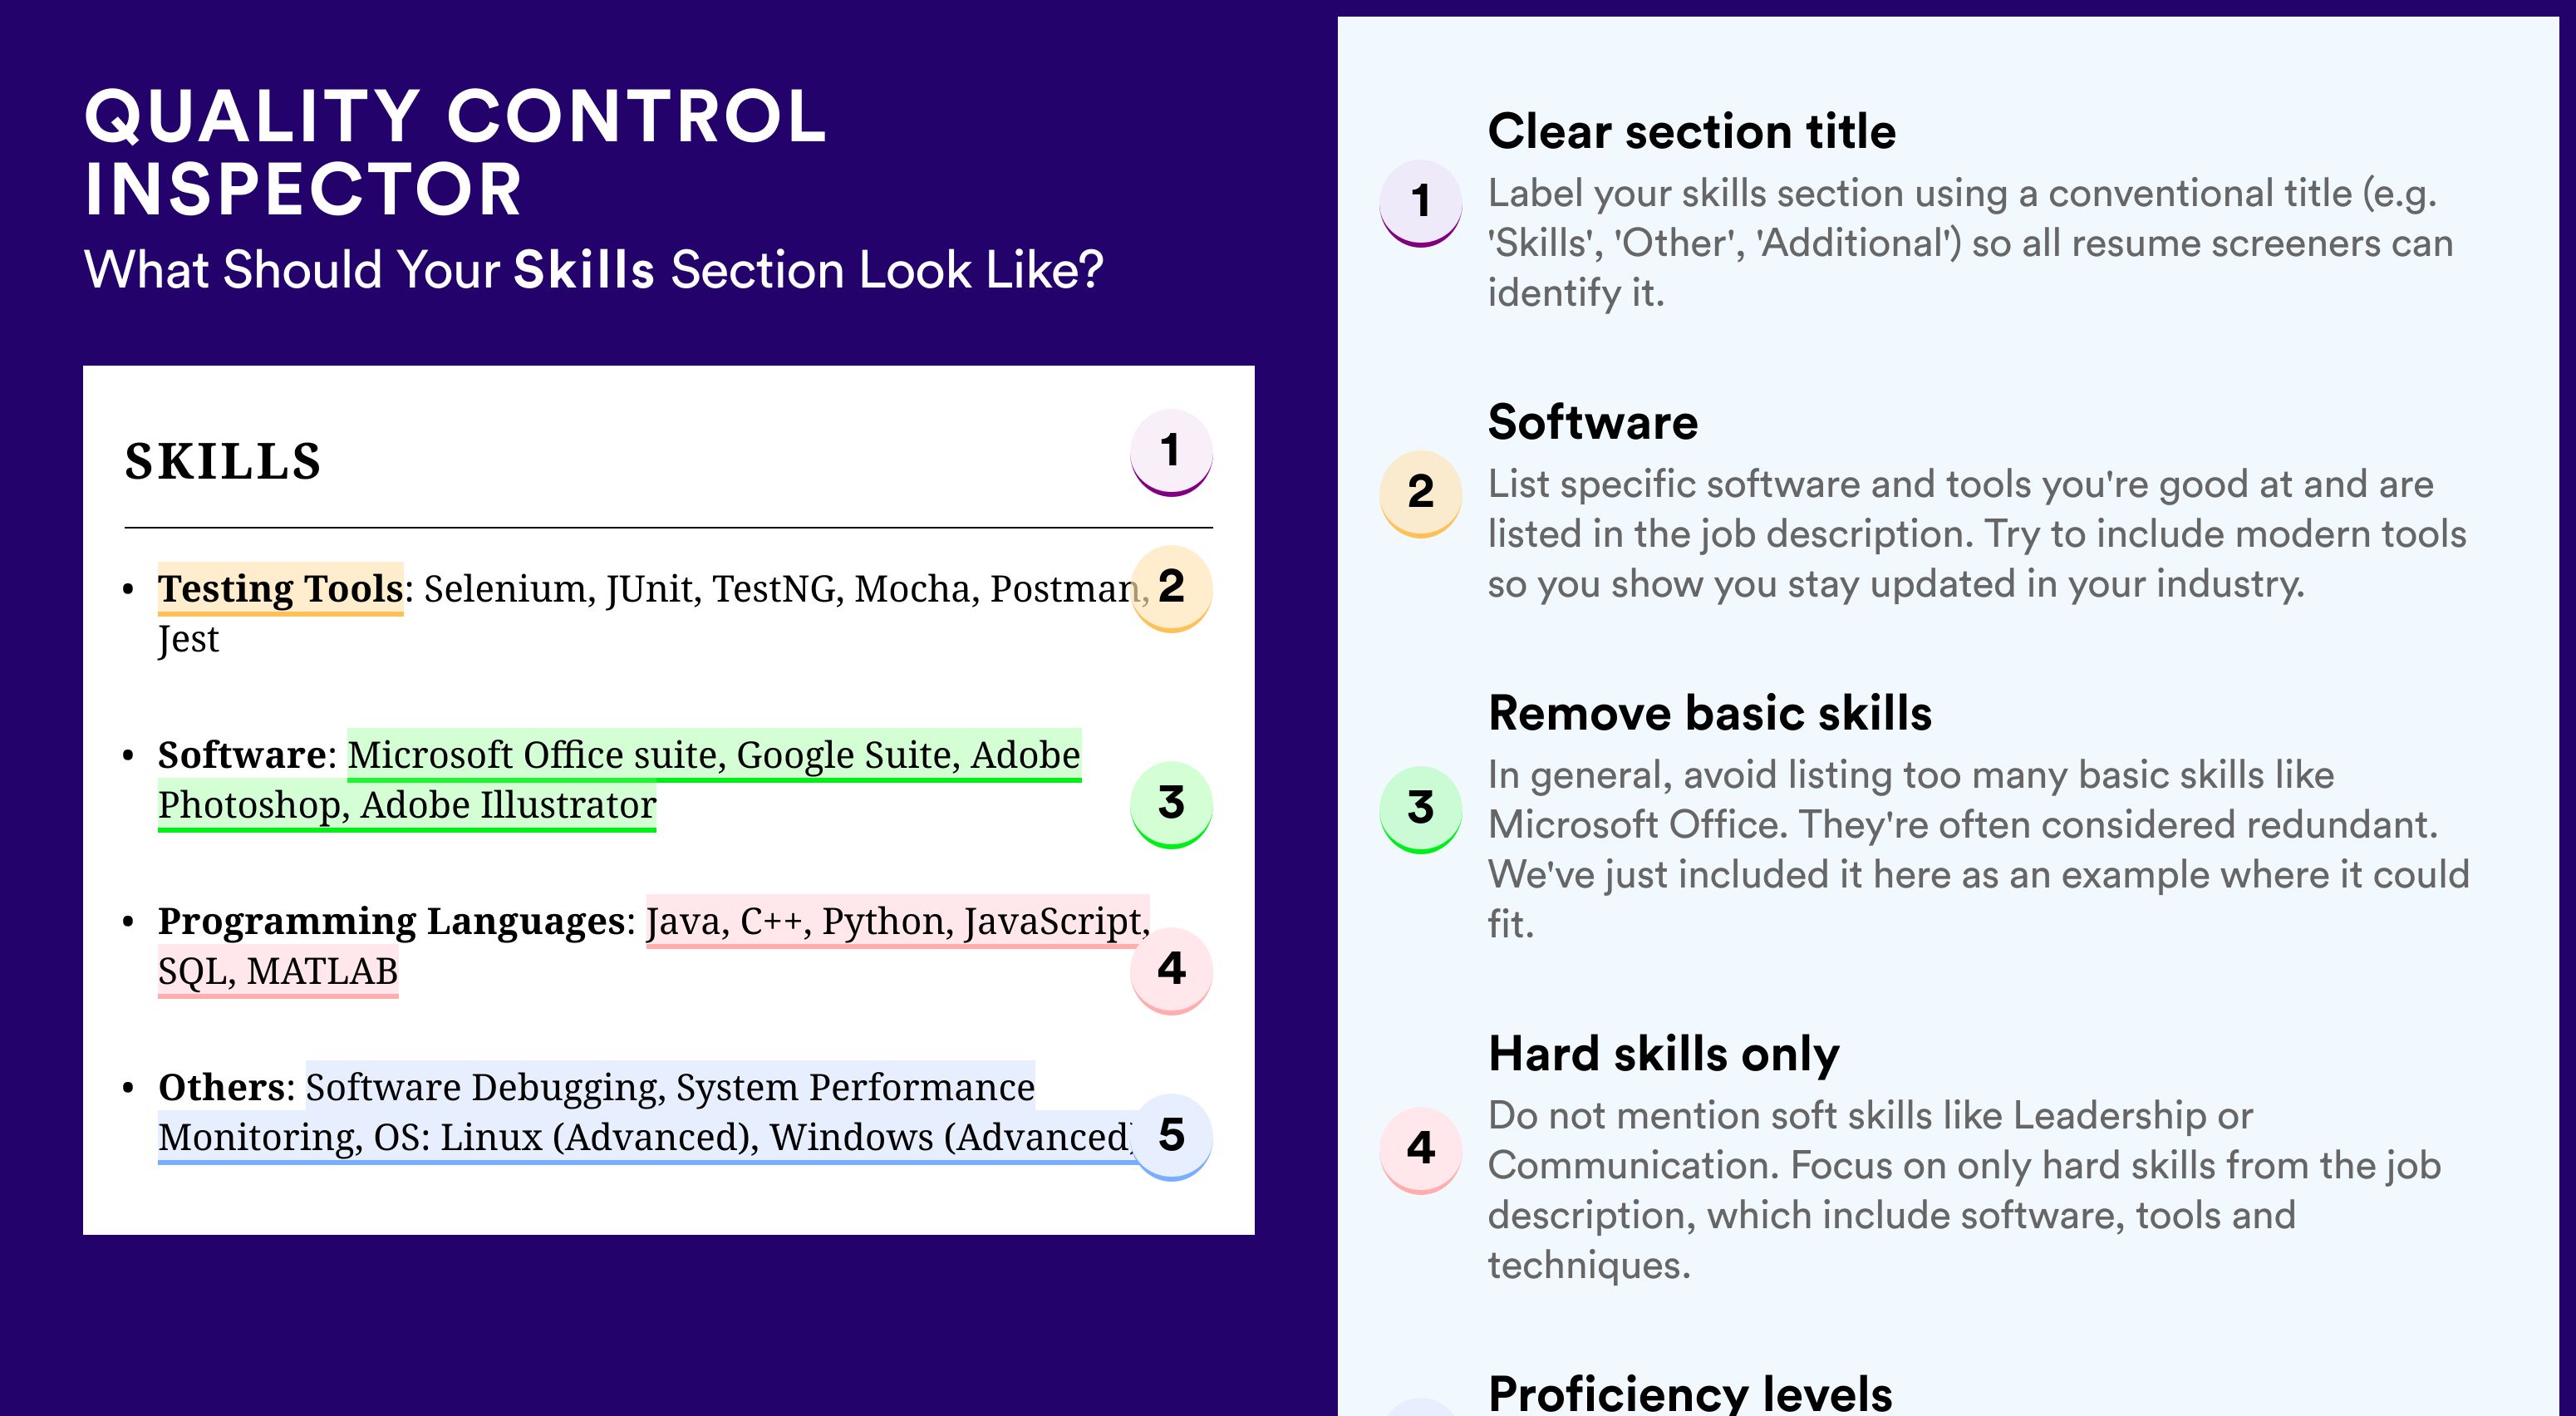 How To Write Your Skills Section - Quality Control Inspector Roles